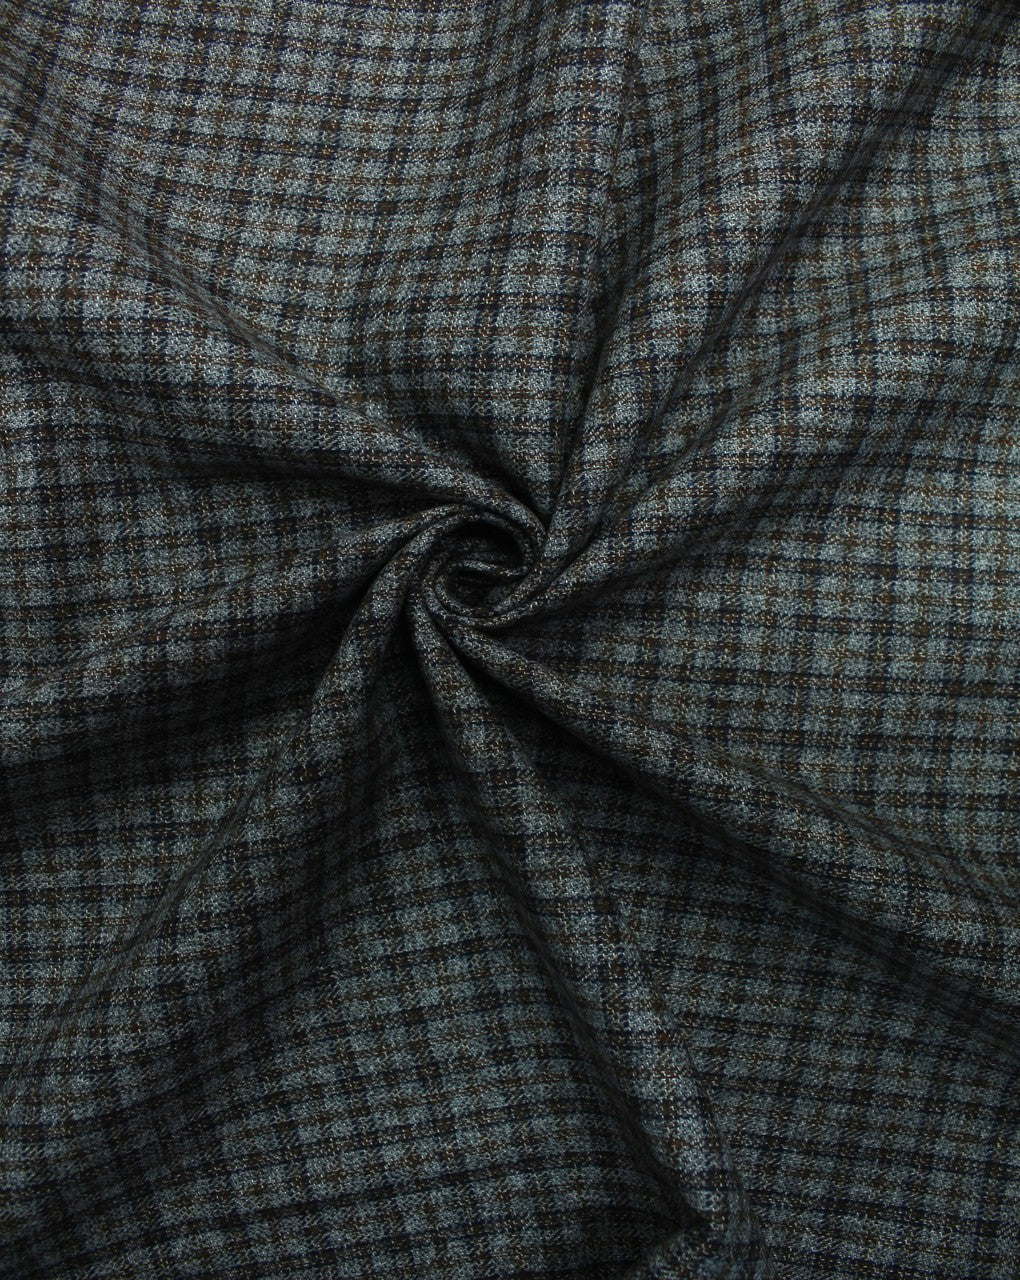 Black And Silver Checks Woolen Tweed Fabric